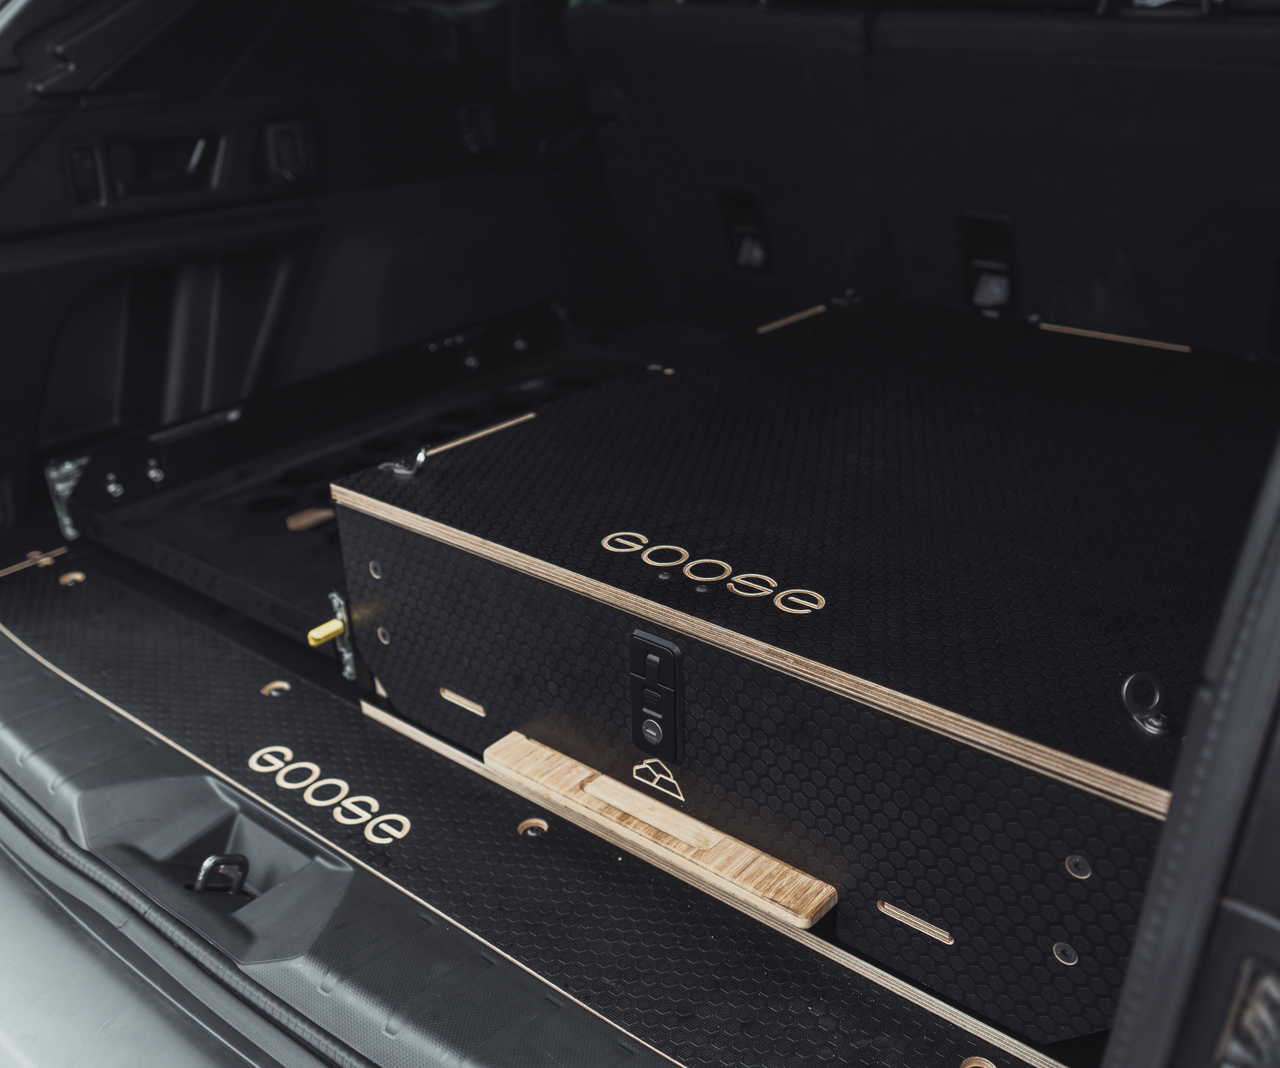 GOOSE GEAR Ultimate Chef and Sleep Package - Subaru Forester 2019-Present 5th Gen.